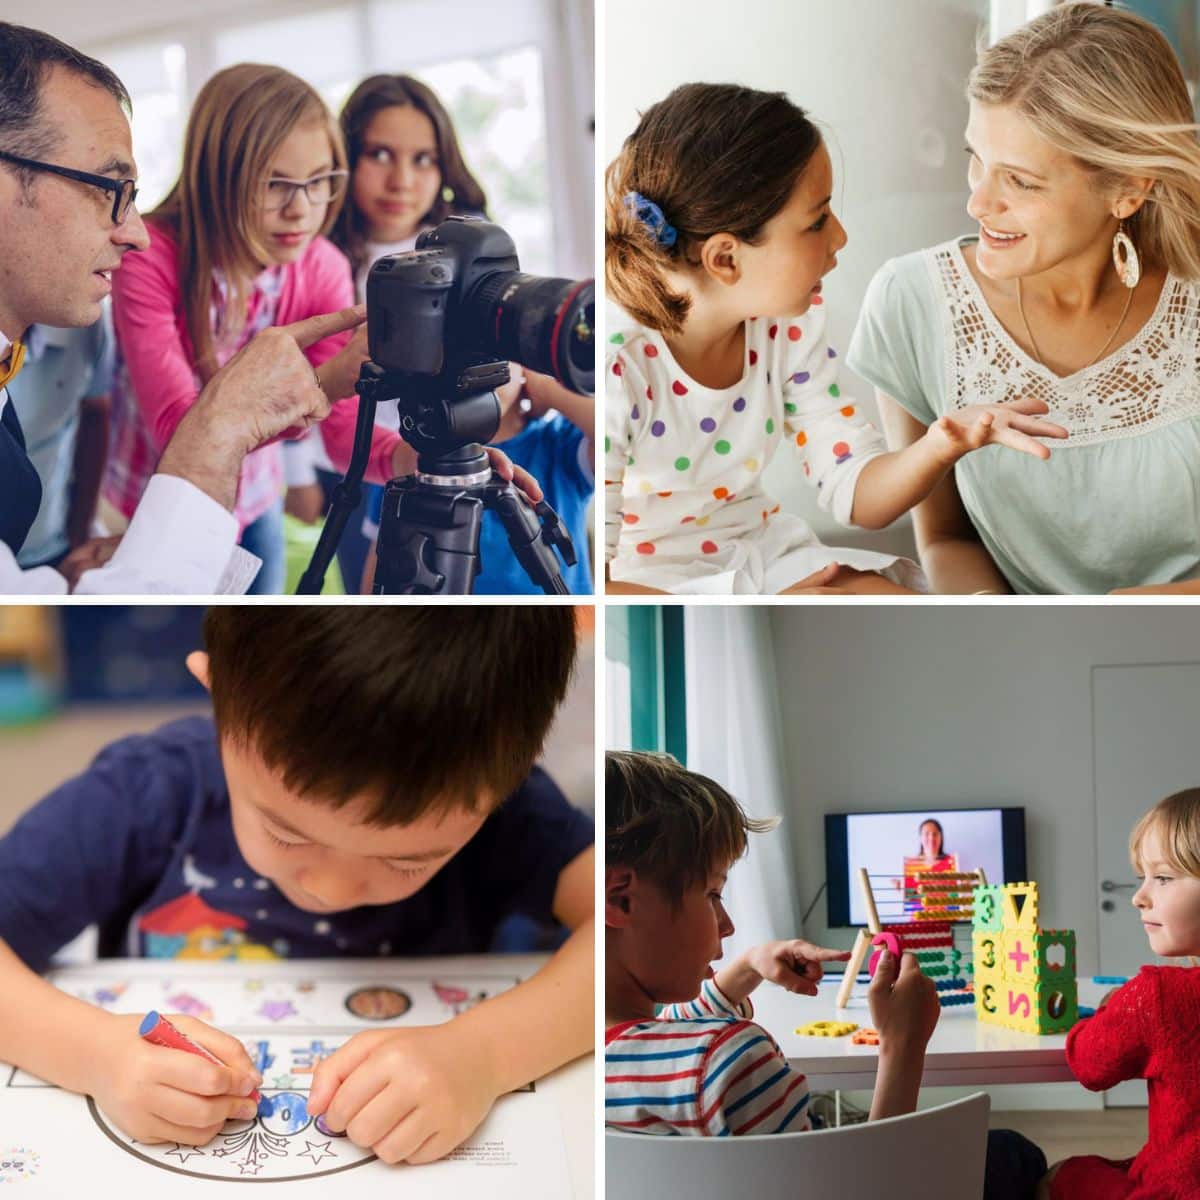 4 image of clever homeschooling ideas.